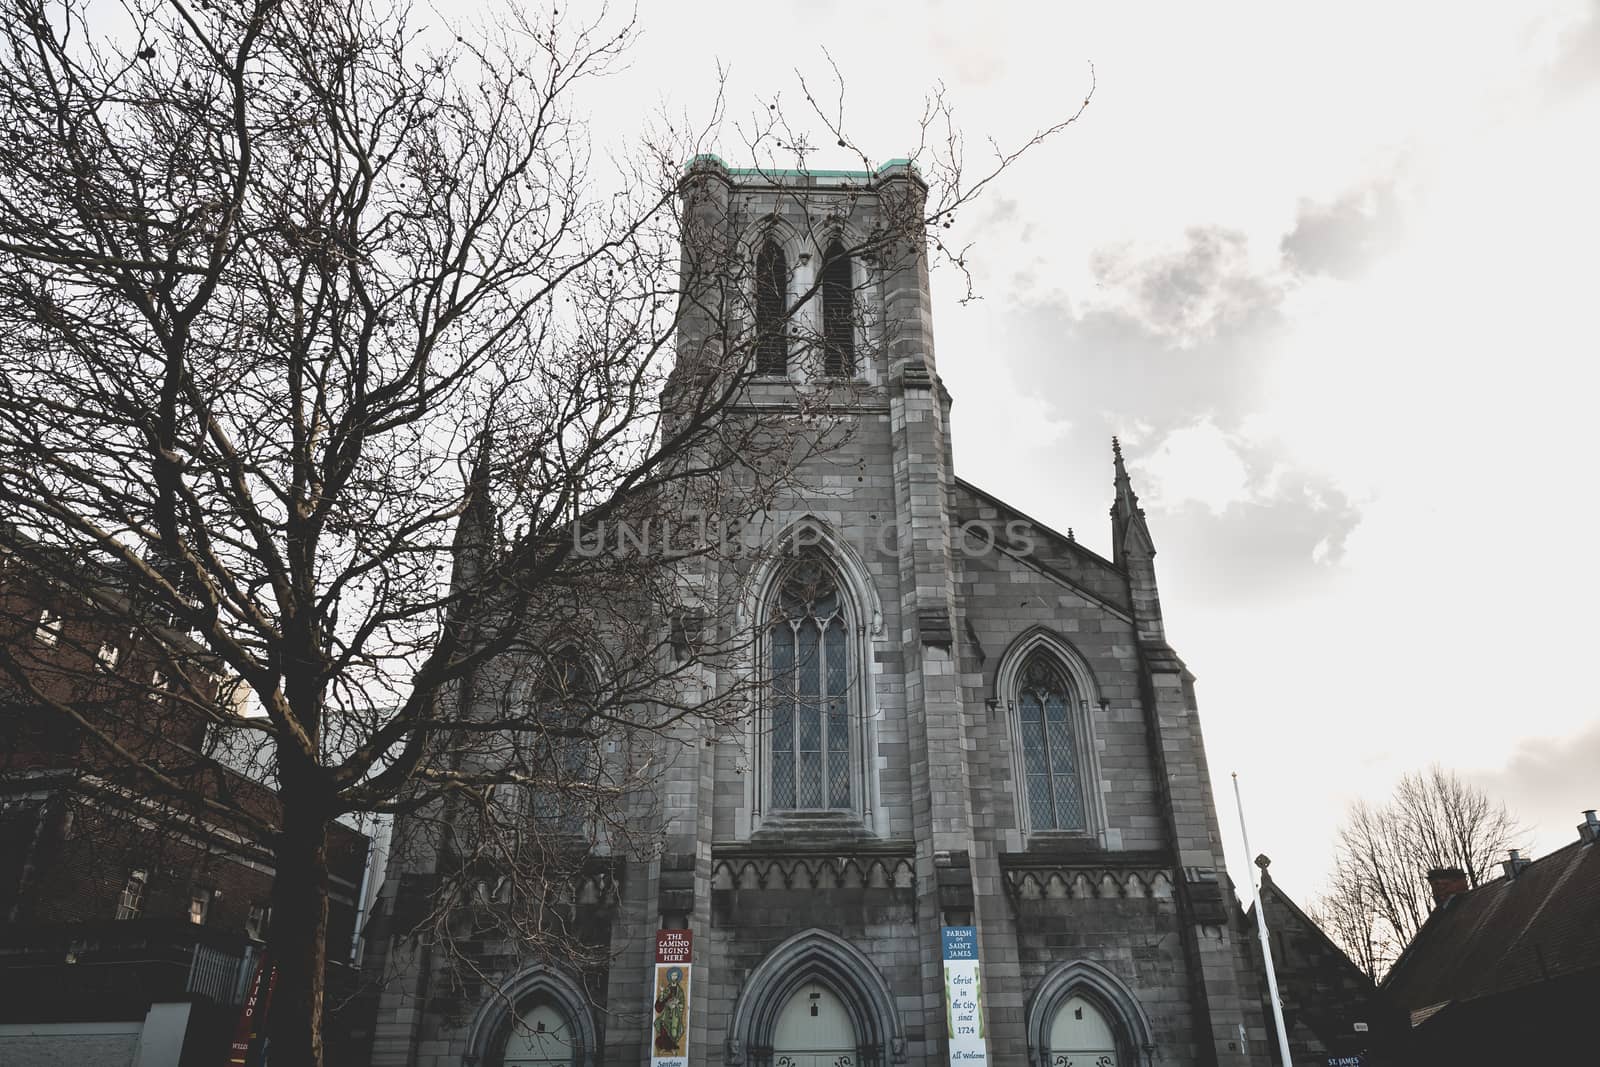 Dublin, Ireland - February 13, 2019: Architectural detail of St Philip and St James' Church on a winter day